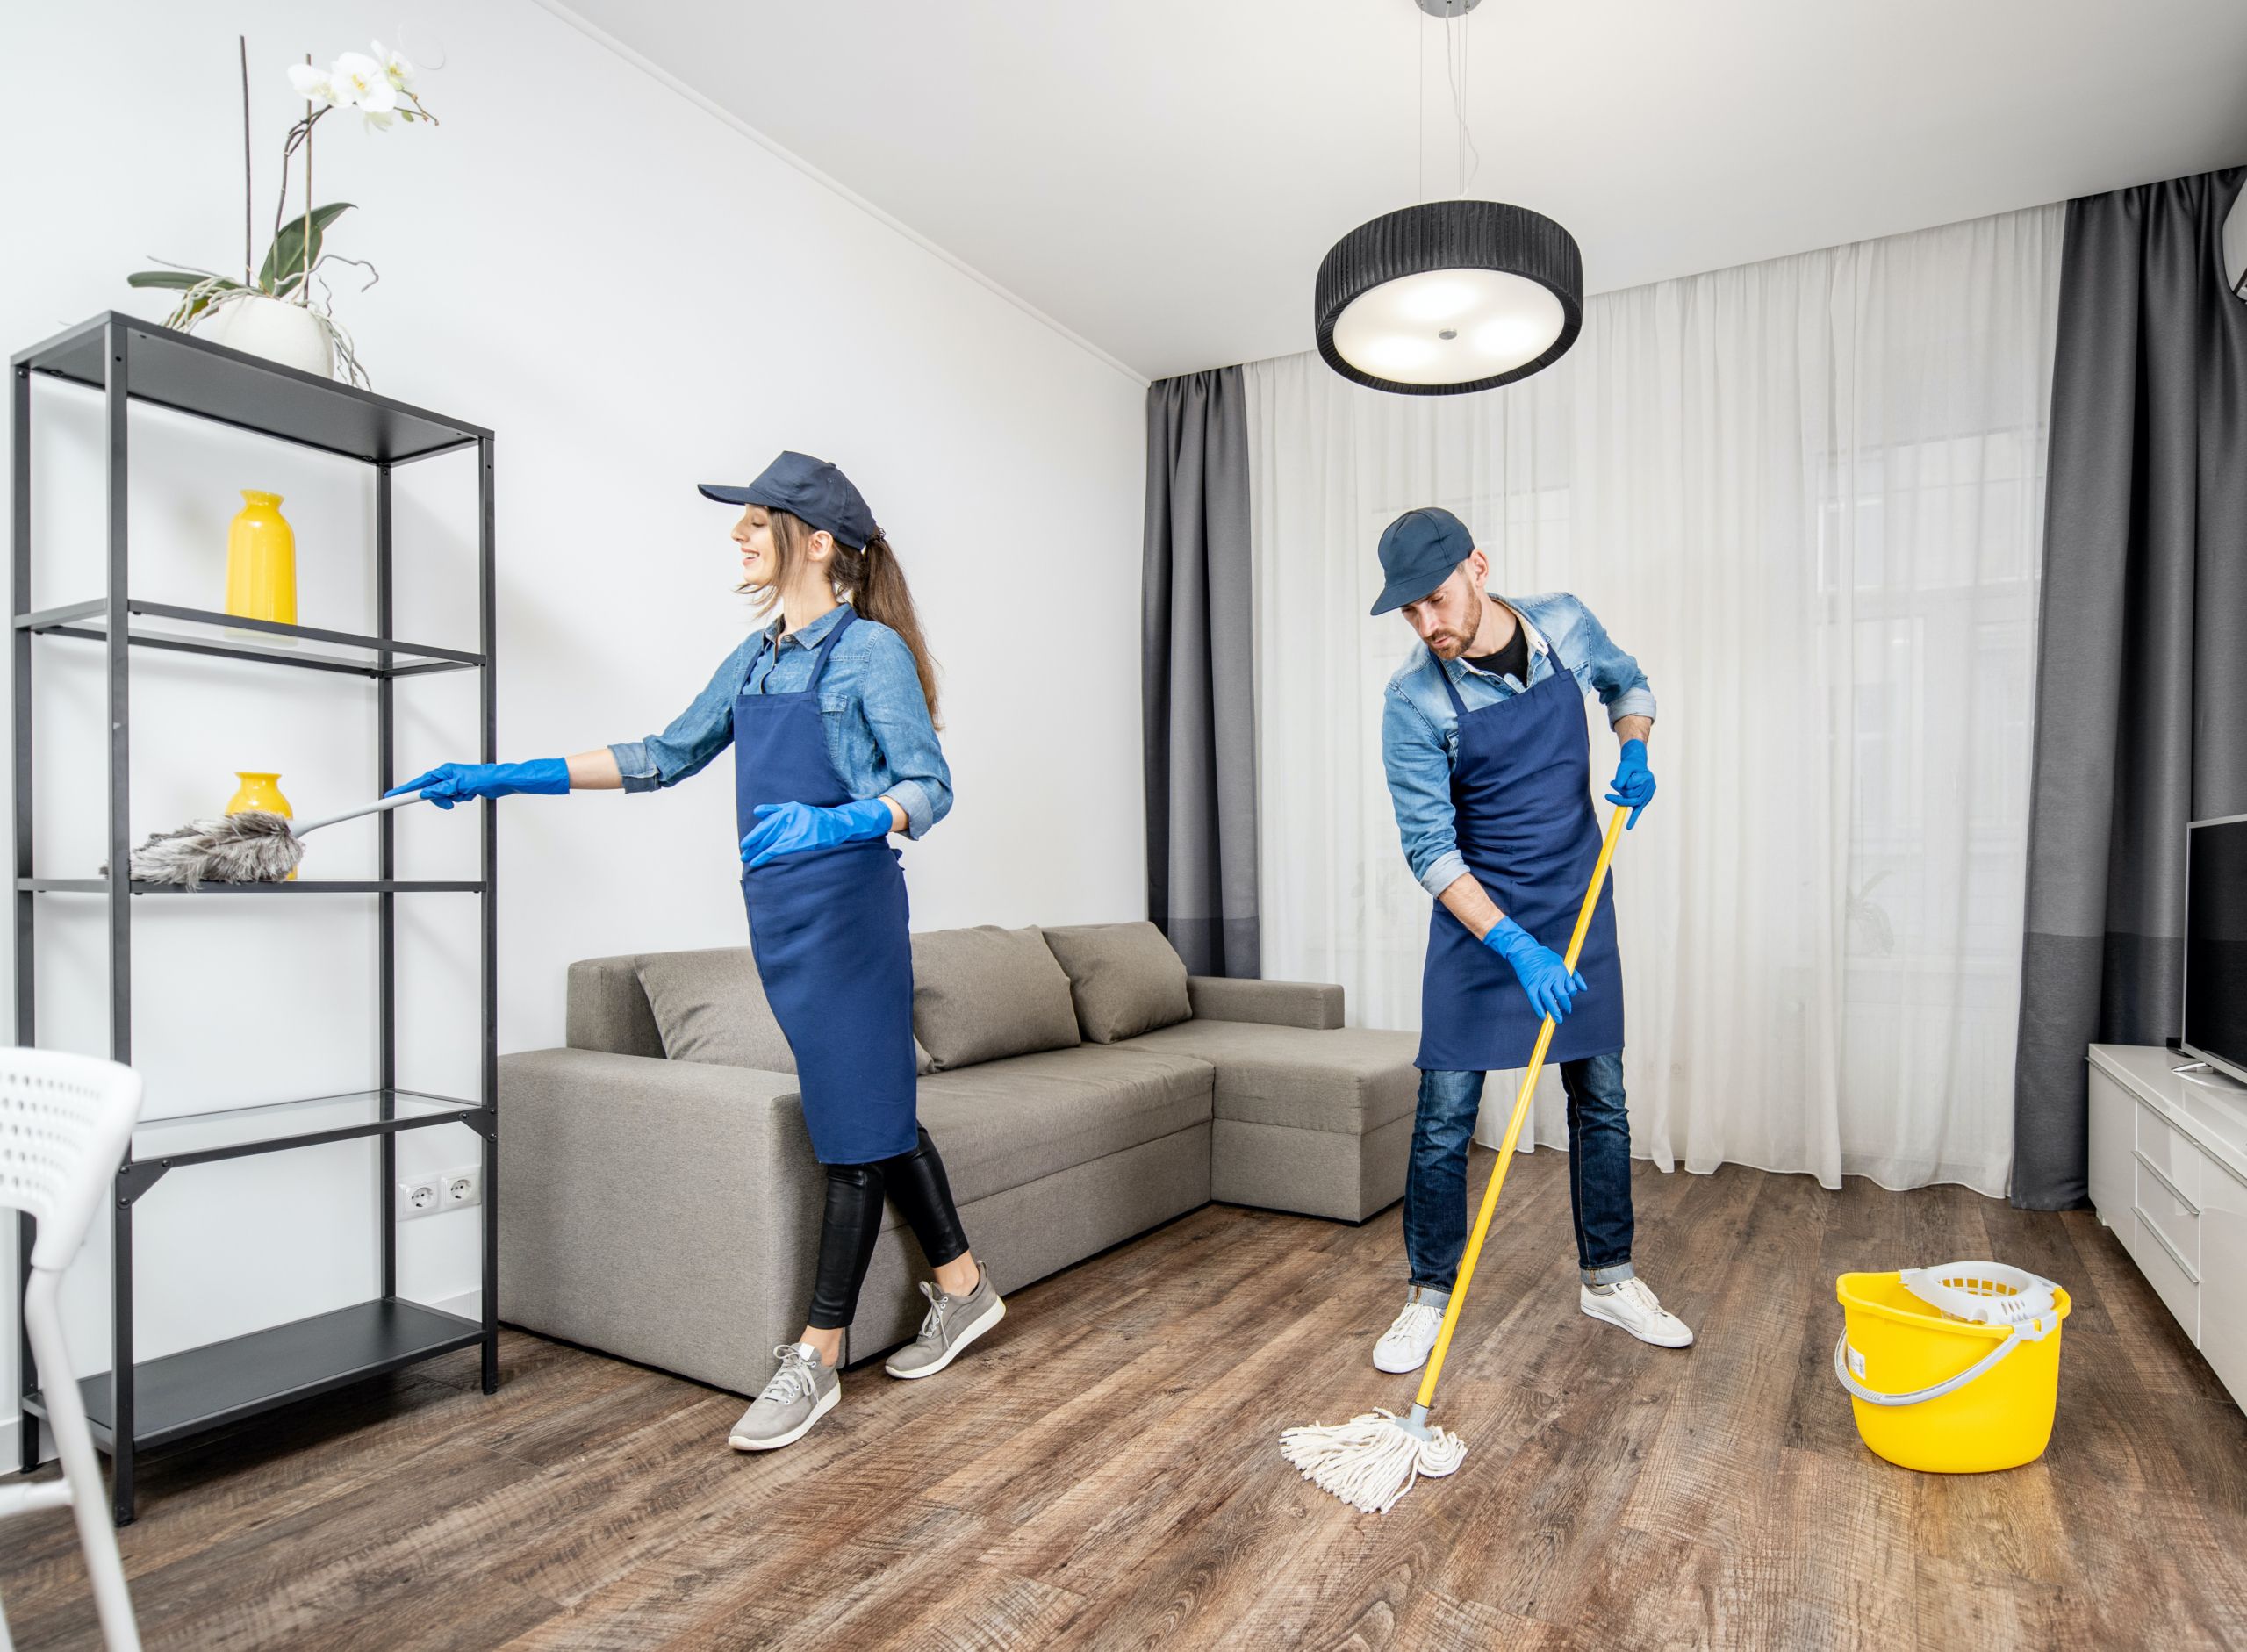 What Are the Best Residential Cleaning Products?